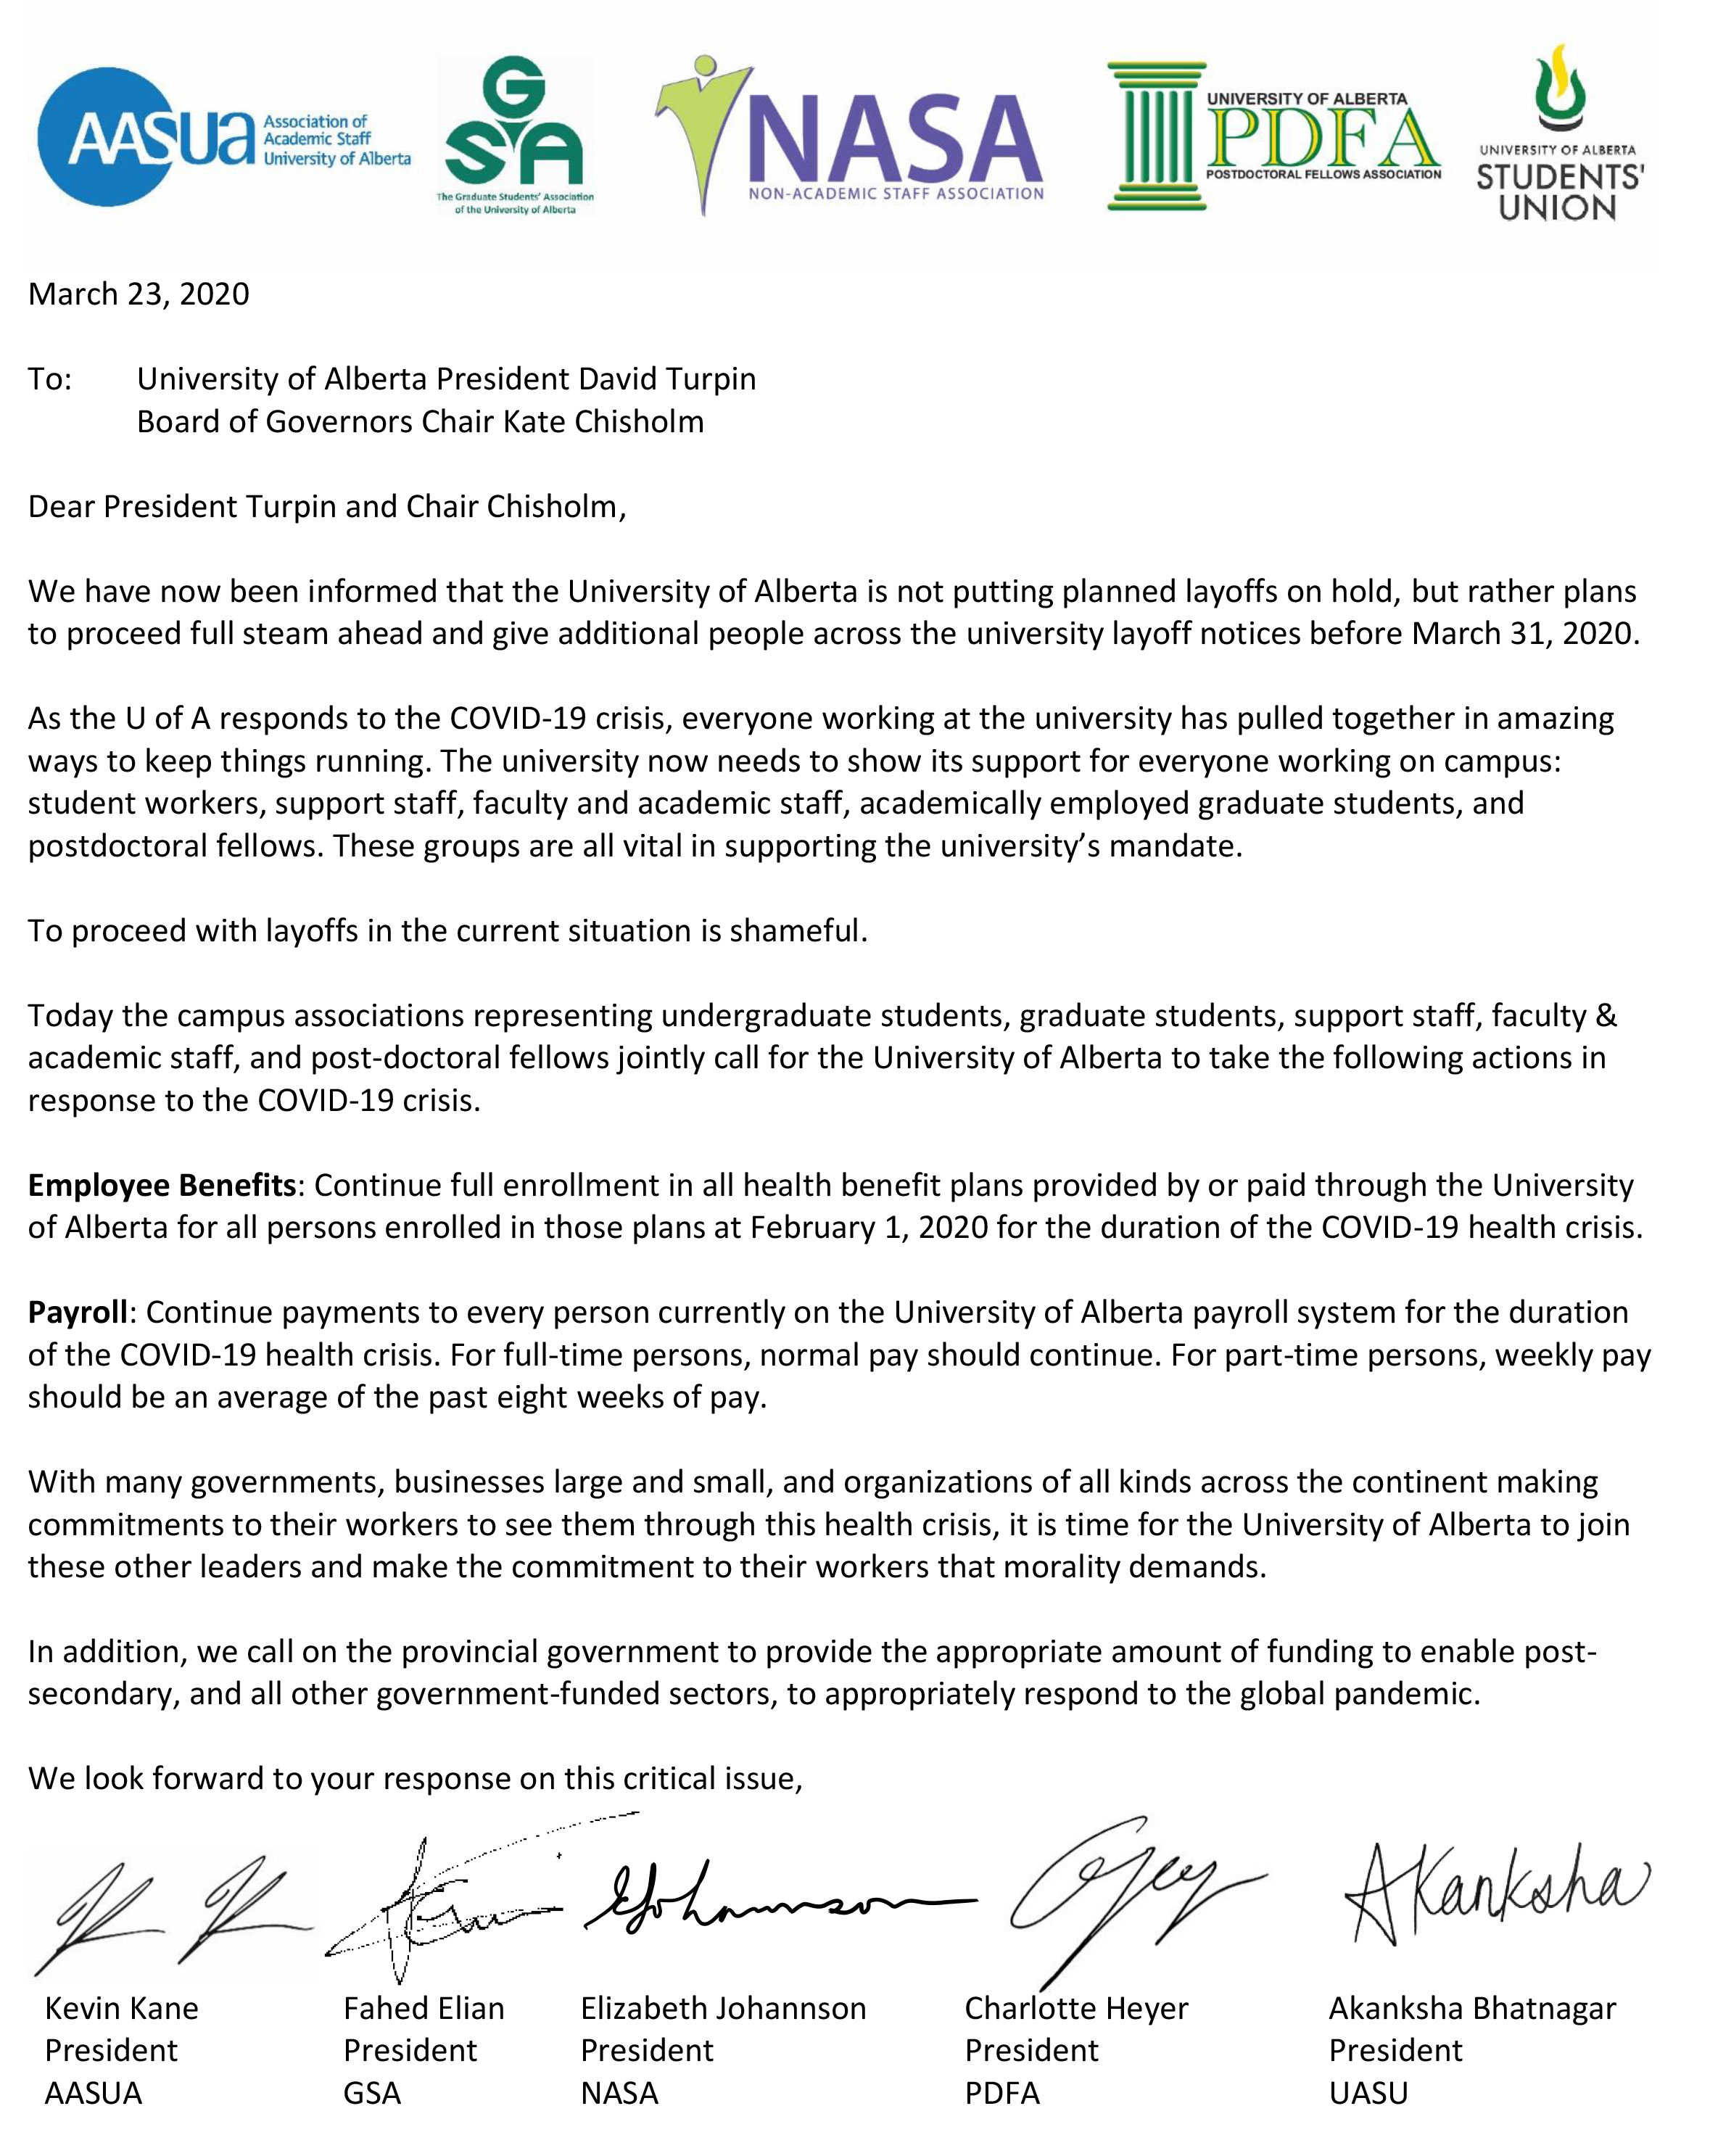 Joint Letter to President Turpin and Chair Chisholm